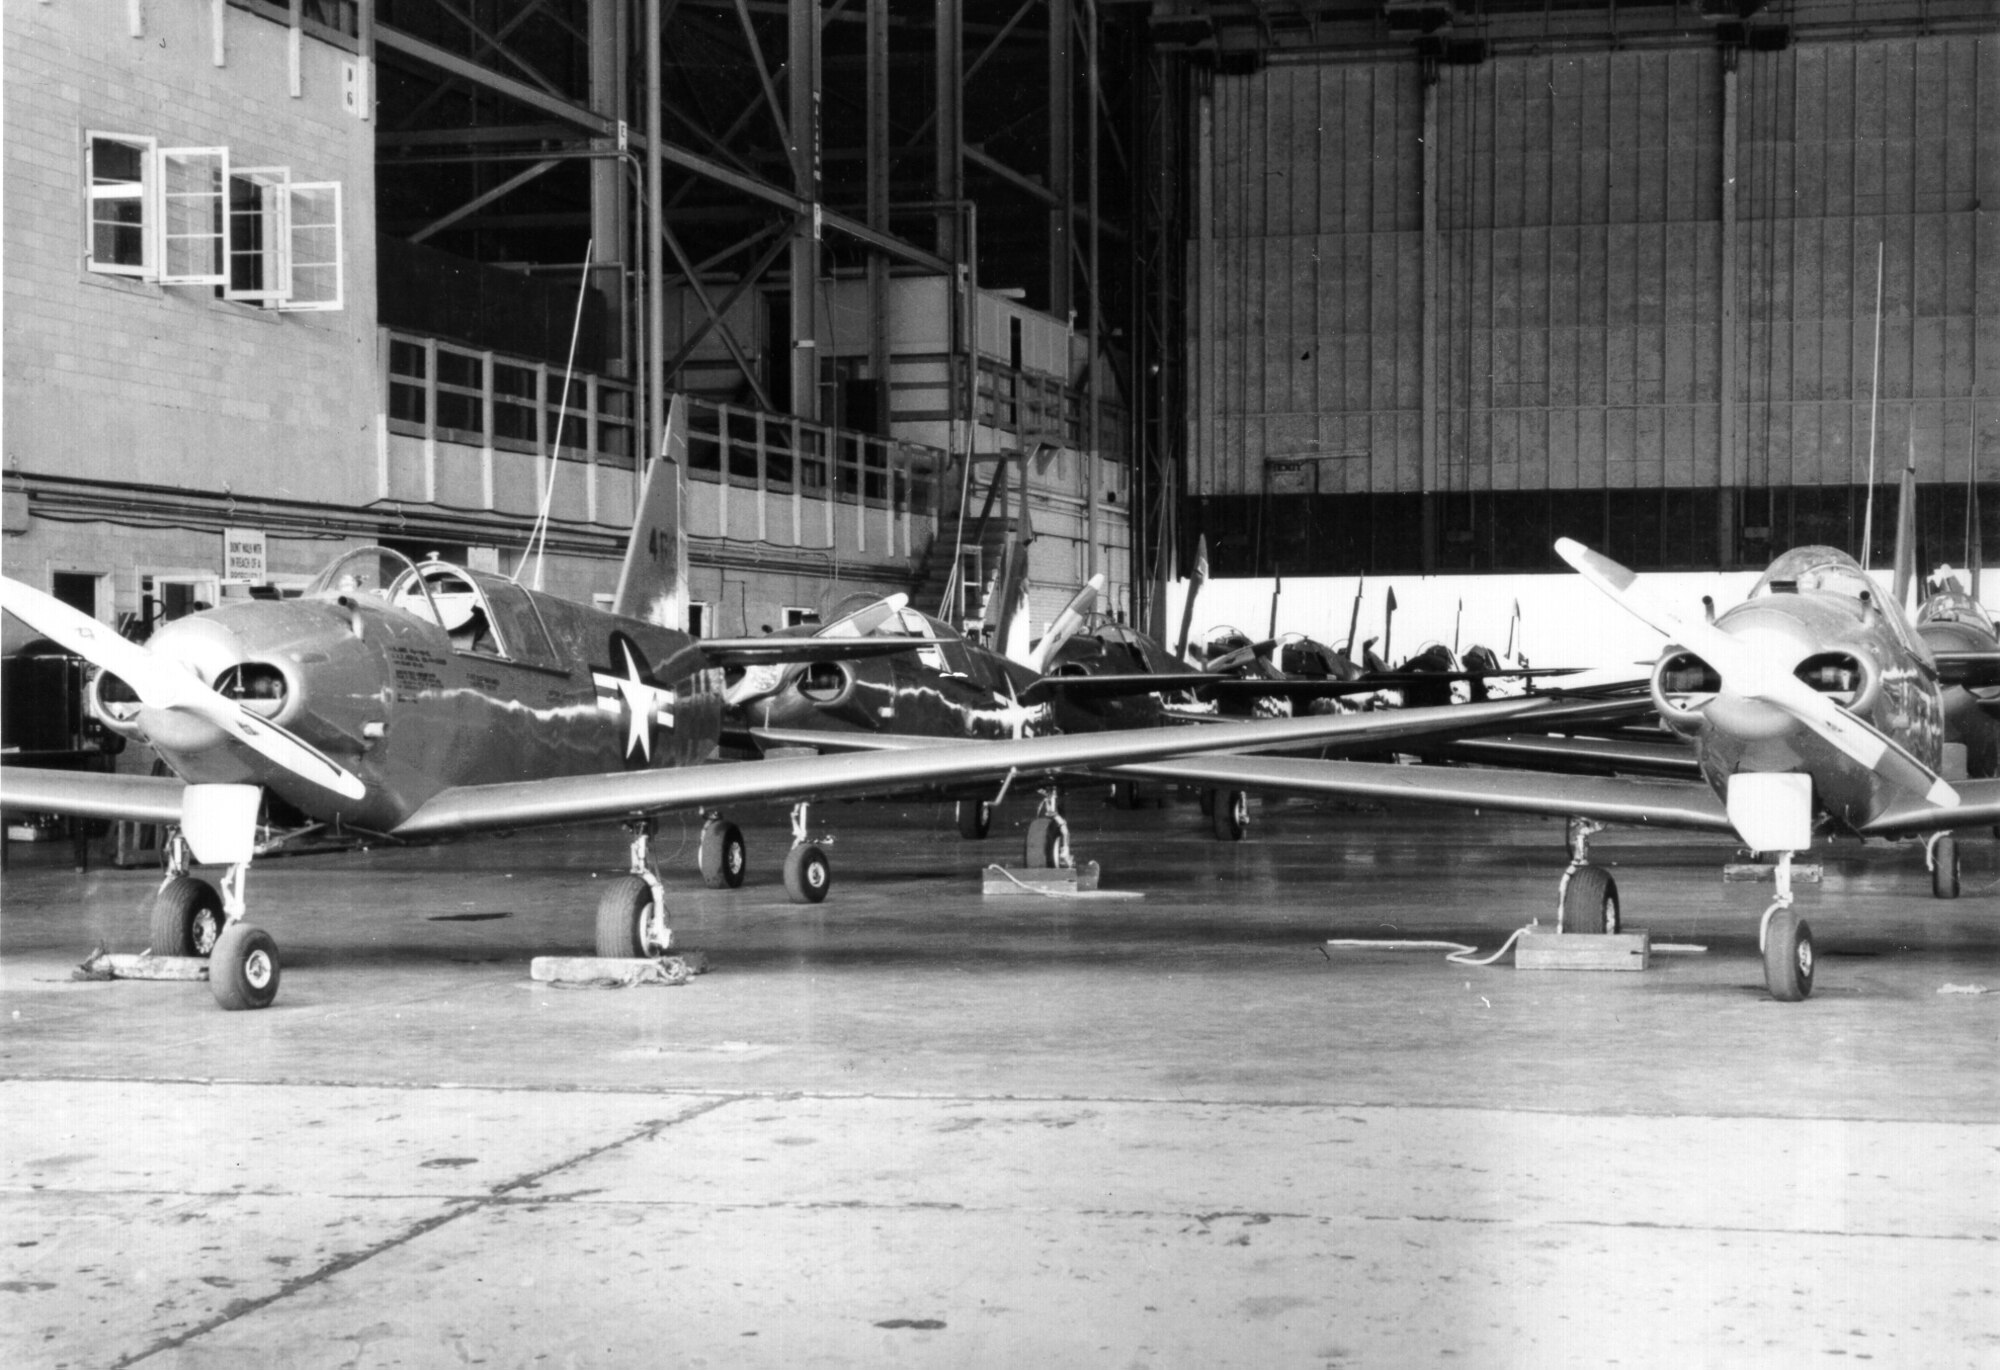 Numerous PQ-14s “Cadets” are shown undergoing maintenance and inspection checks at Tinker Field. These checks were routinely conducted during delivery and acceptance review by the Army Air Corps. (Photo courtesy of the Tinker History Office)